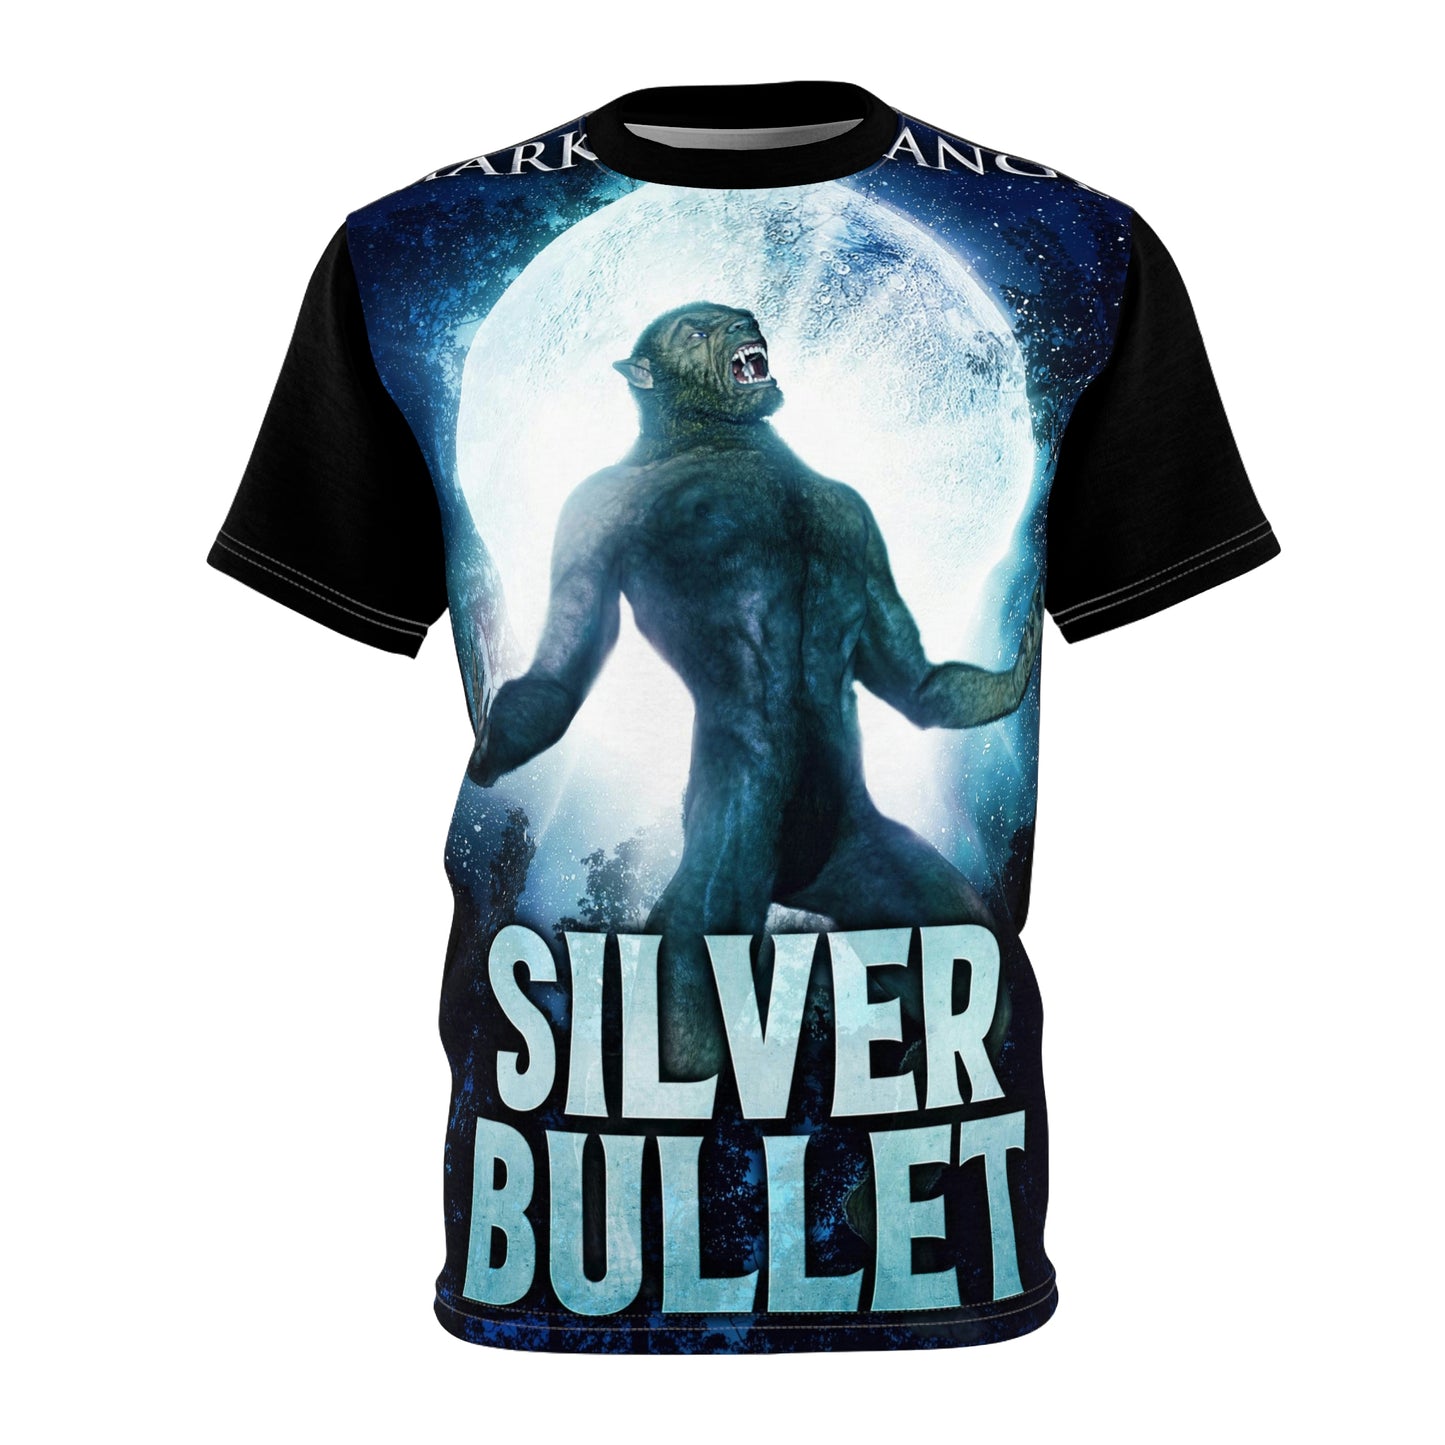 Silver Bullet - Unisex All-Over Print Cut & Sew T-Shirt